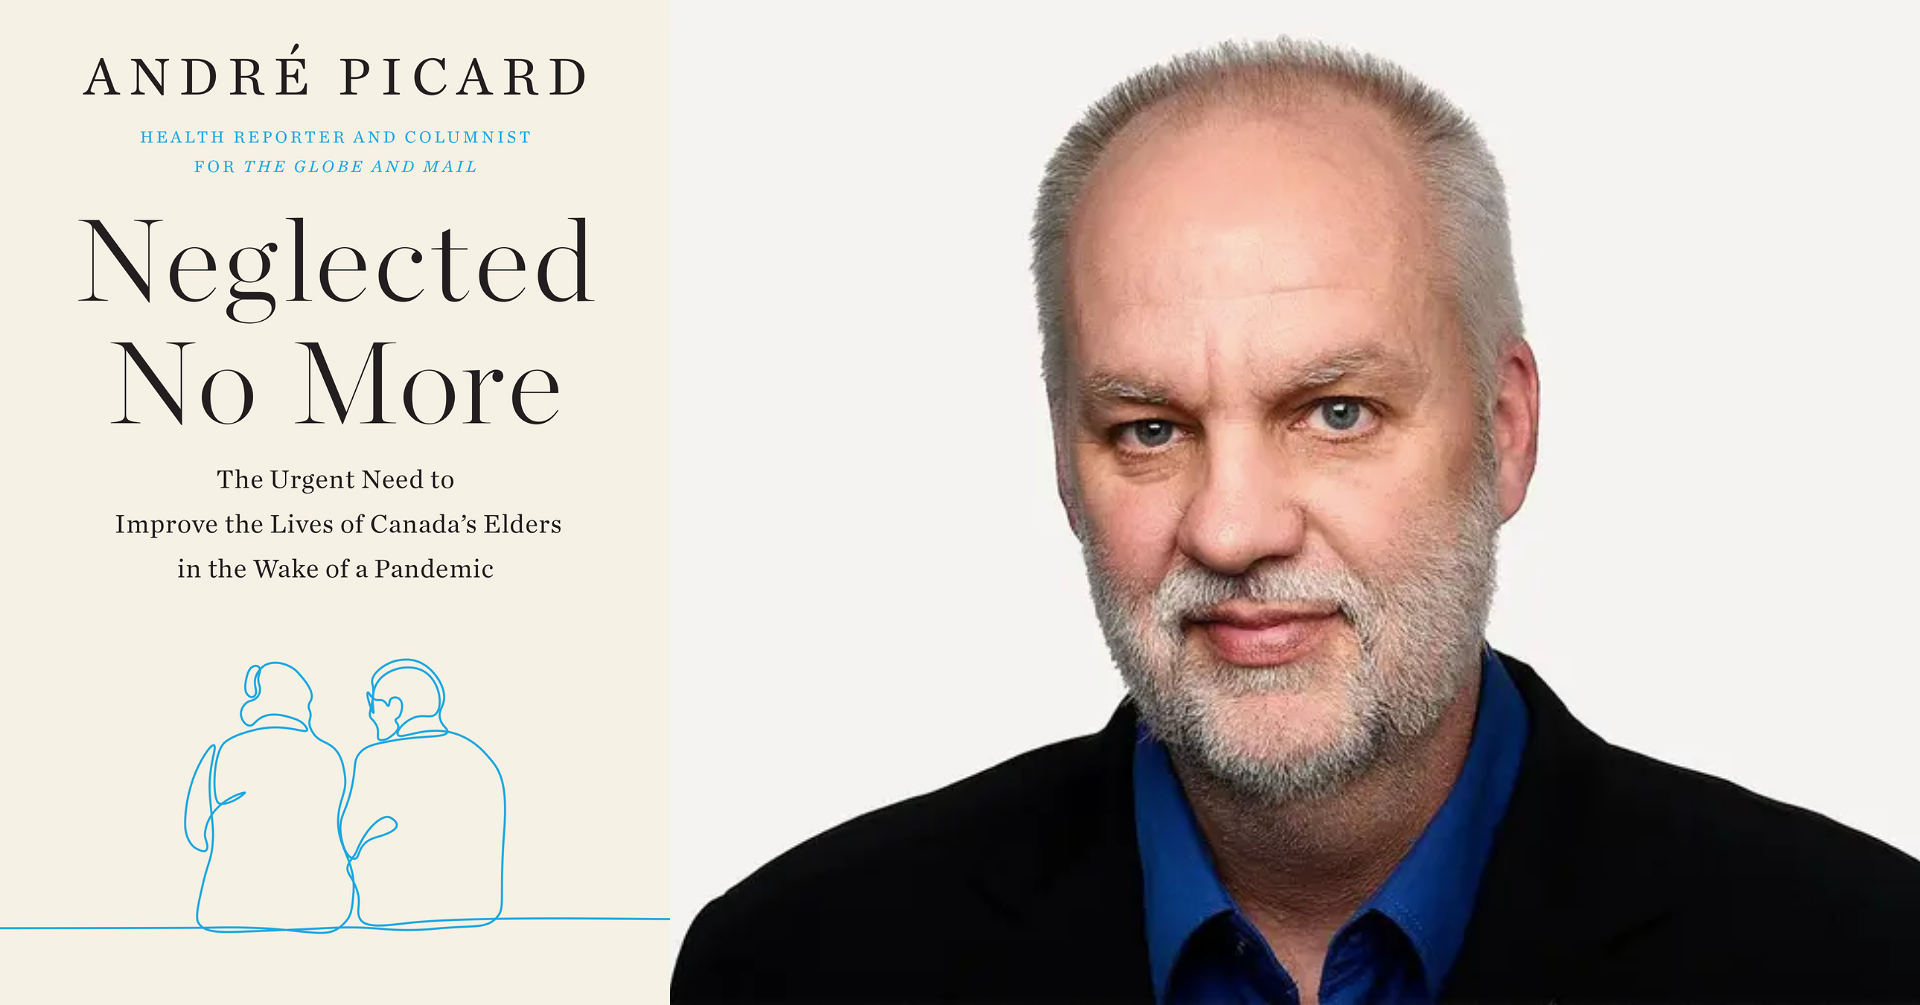 #BCCPA2021 Annual Conference: announcing André Picard as a #BCCPA2021 keynote presenter